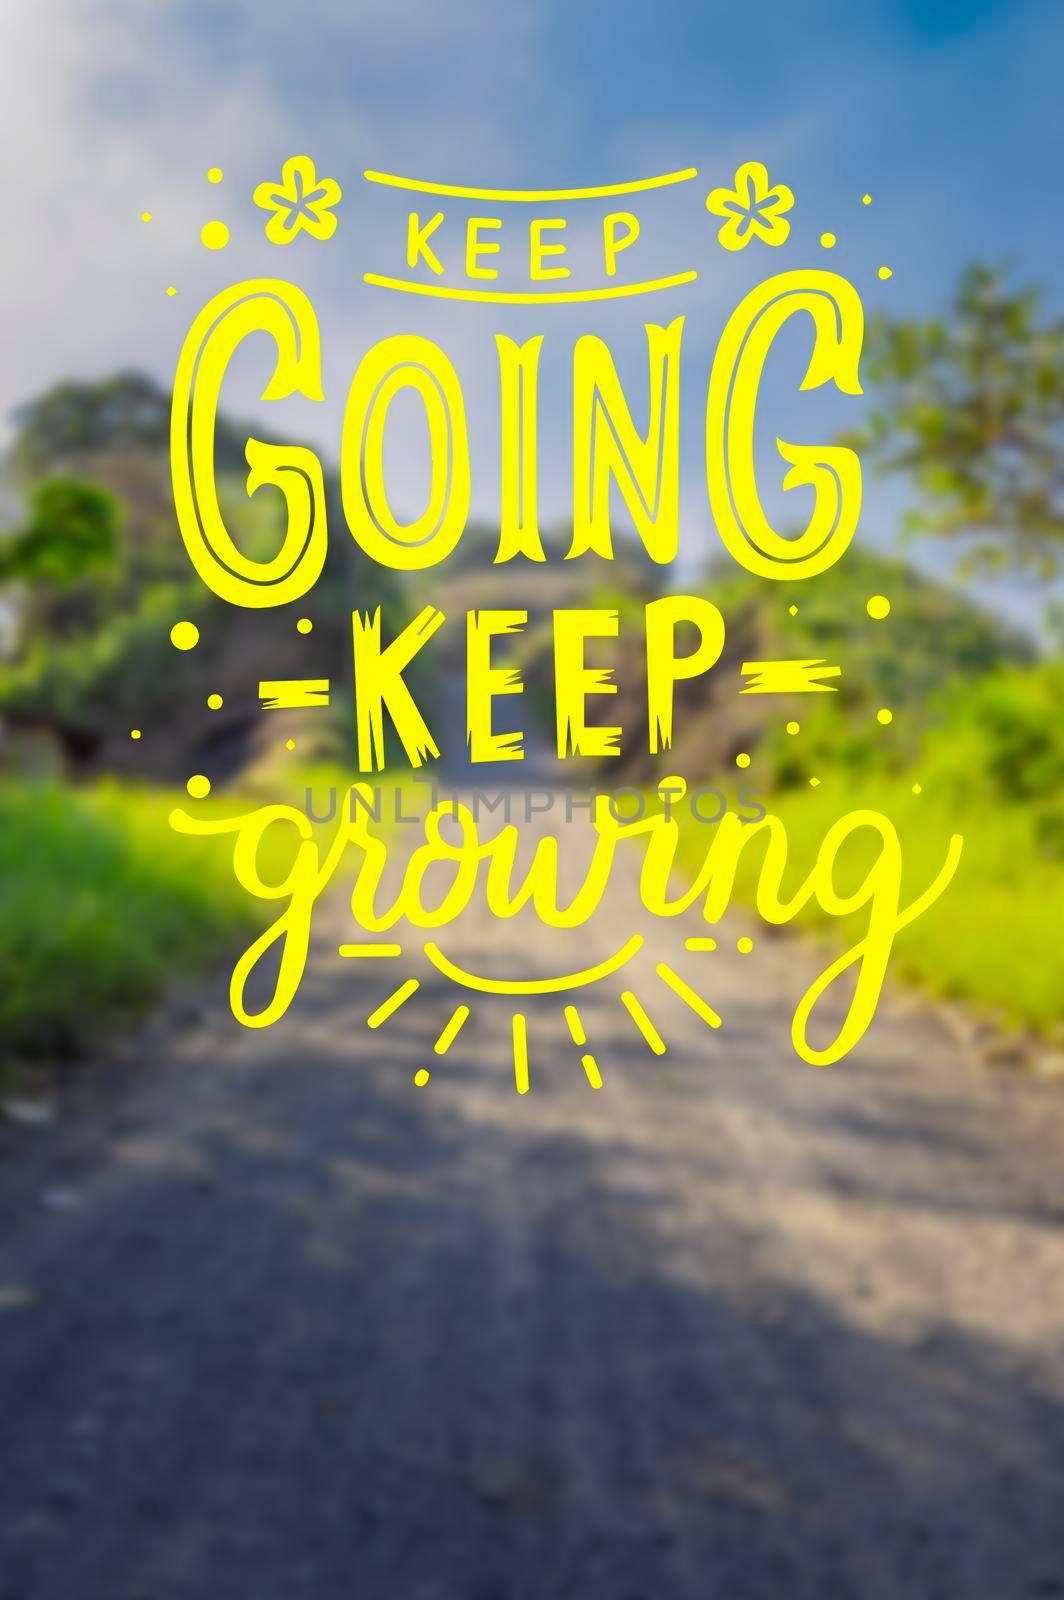 motivational phrases keep going keep growing, motivational messages keep going, keep growing